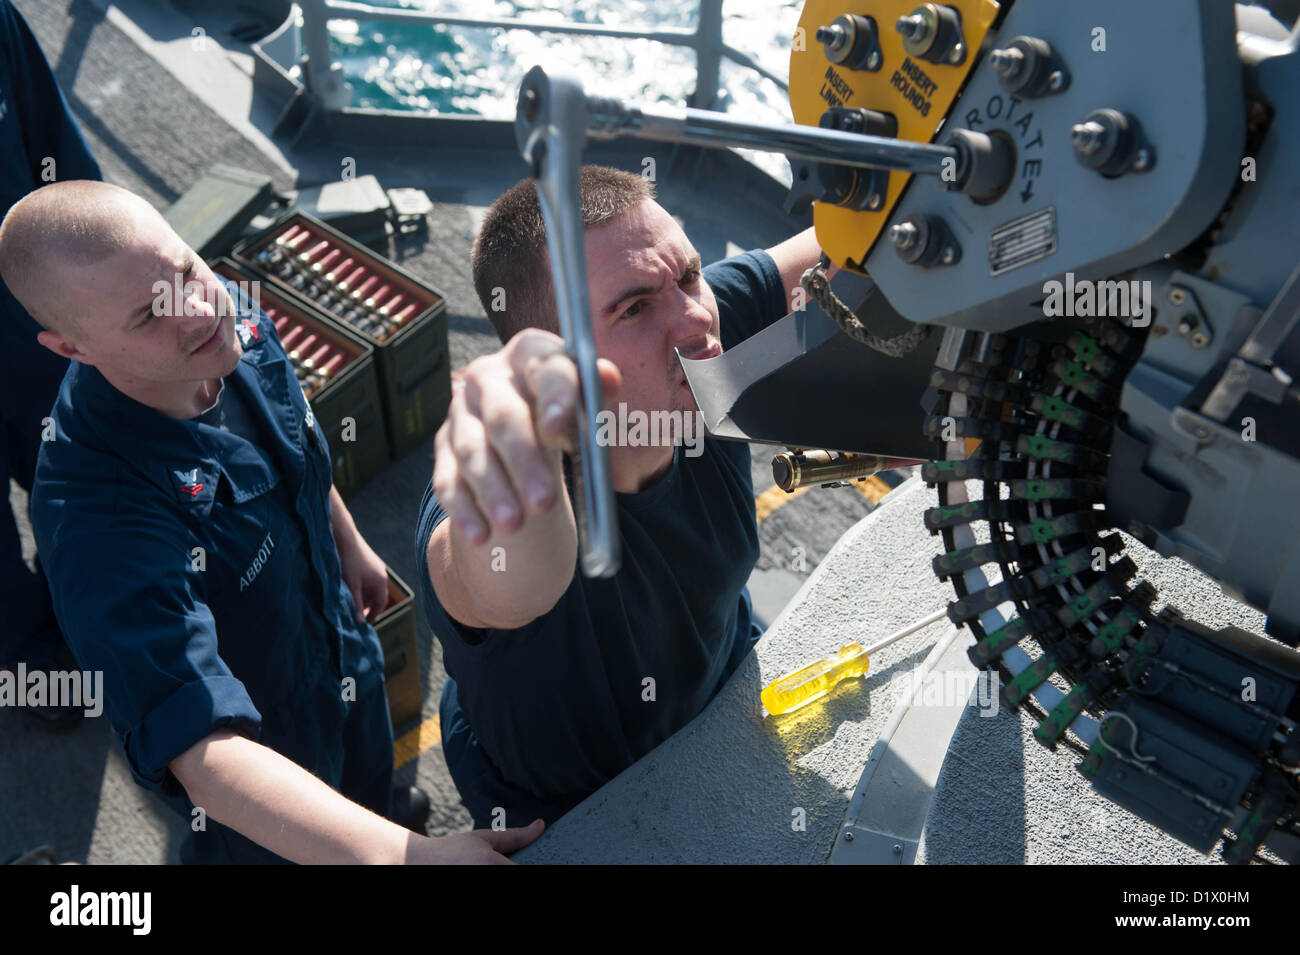 (Jan. 7, 2013) ) – Fire Controlman 2nd Class Christopher Martin, from Franklin, Ky., shows Fire Controlman 2nd Class Joel Abbott, from Cleveland, Tenn., how to load rounds into a Close-In Weapons System (CIWS) aboard the Ticonderoga-class guided-missile cruiser USS Mobile Bay (CG 53). Mobile Bay is deployed with the John C. Stennis Strike Group to the U.S. 5th Fleet area of responsibility conducting maritime security operations, theater security cooperation efforts and support missions for Operation Enduring Freedom. (U.S. Navy photo by Mass Communication Specialist 2nd Class Armando Gonzales/ Stock Photo